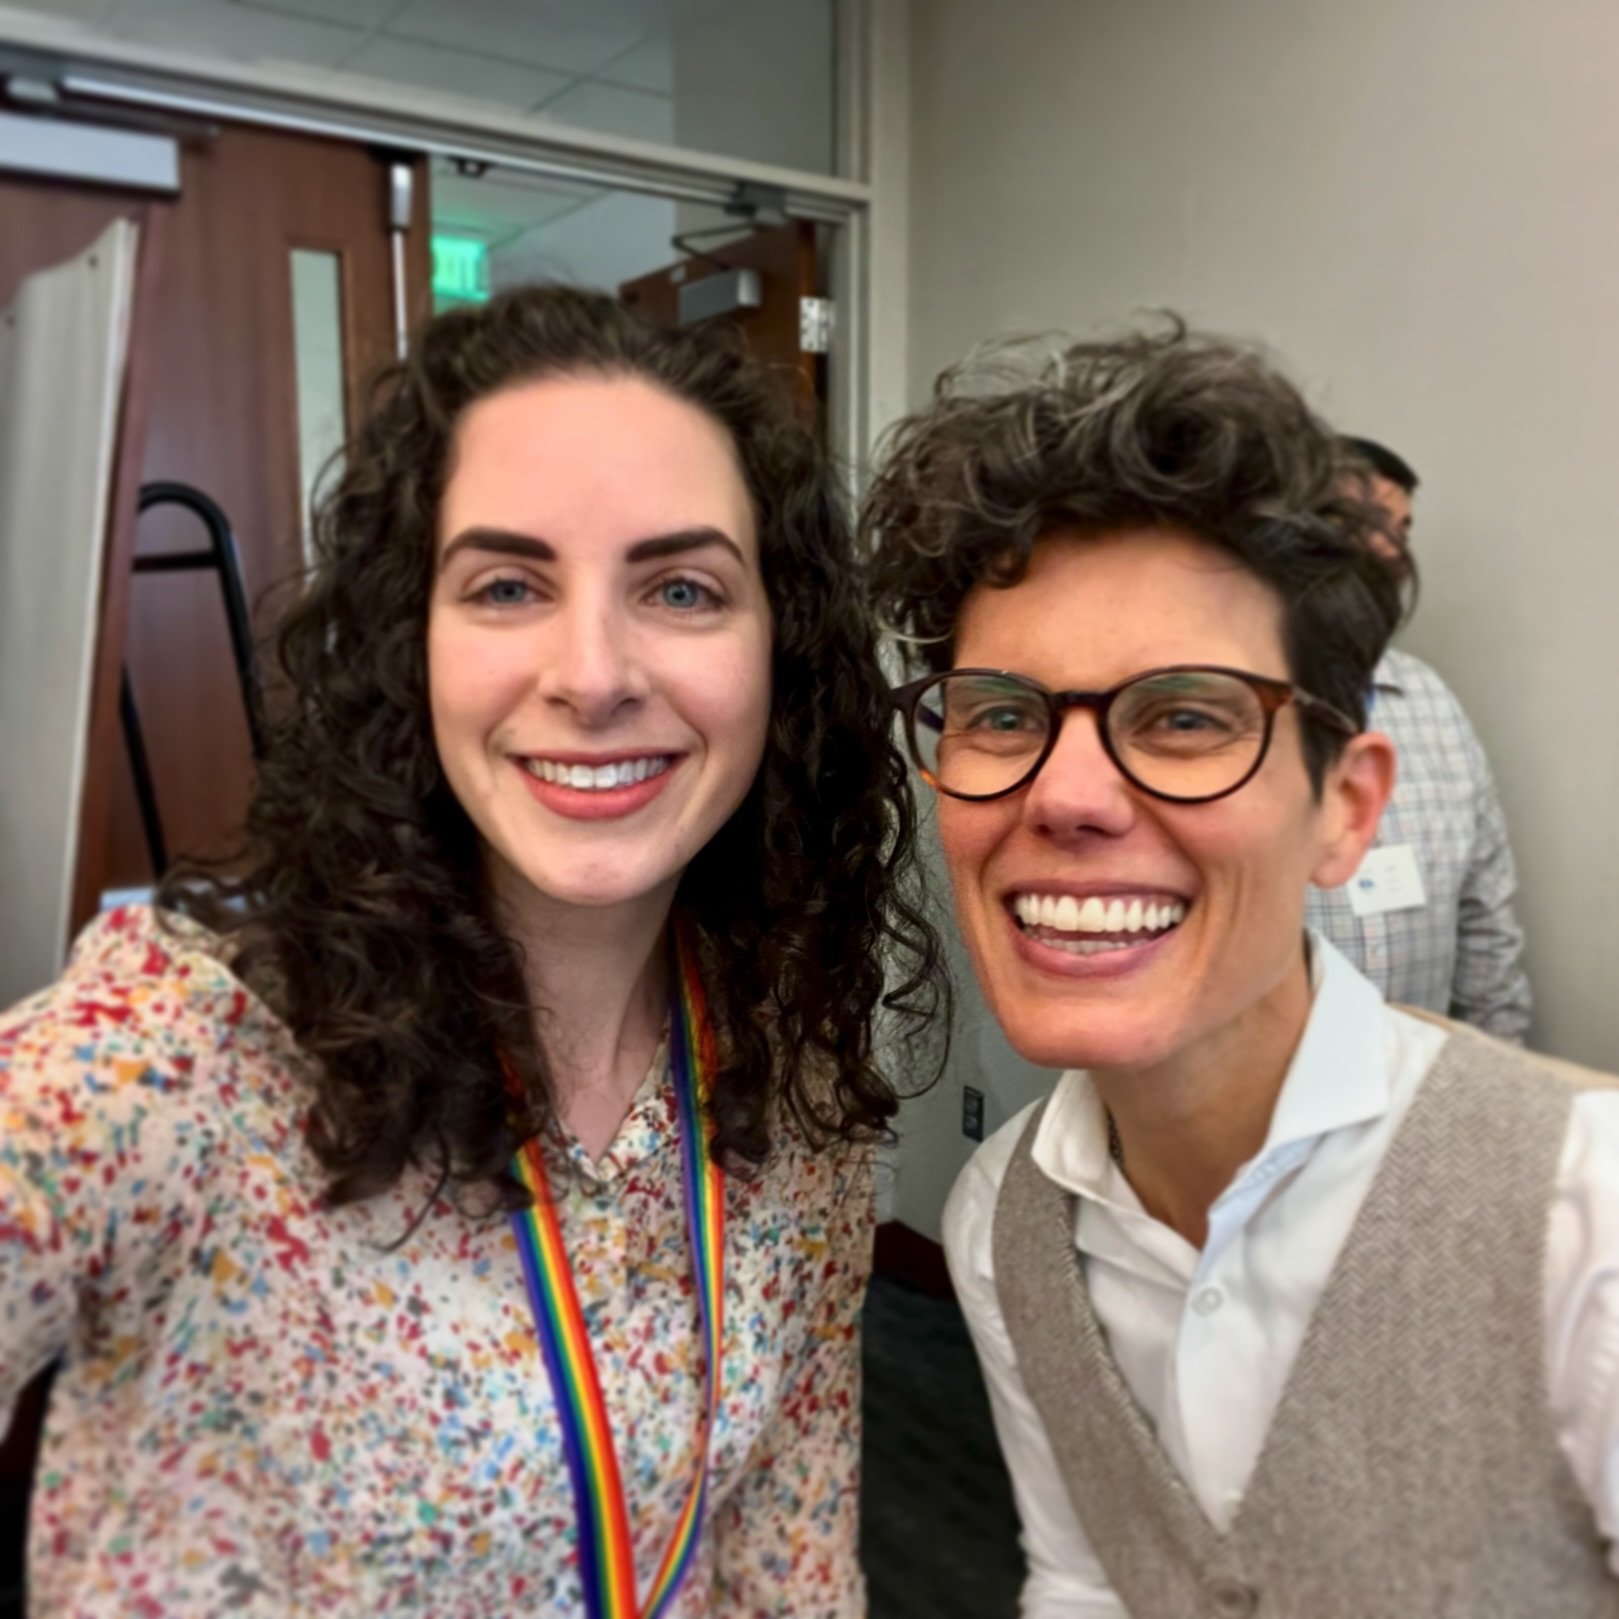 I got an amazing opportunity to meet @janashortal today when they spoke at an LGBTQ+ Development Day hosted at my work. We so admire them and love seeing anyone share their stories, but especially local, authentic, fellow queer parents. If you want s